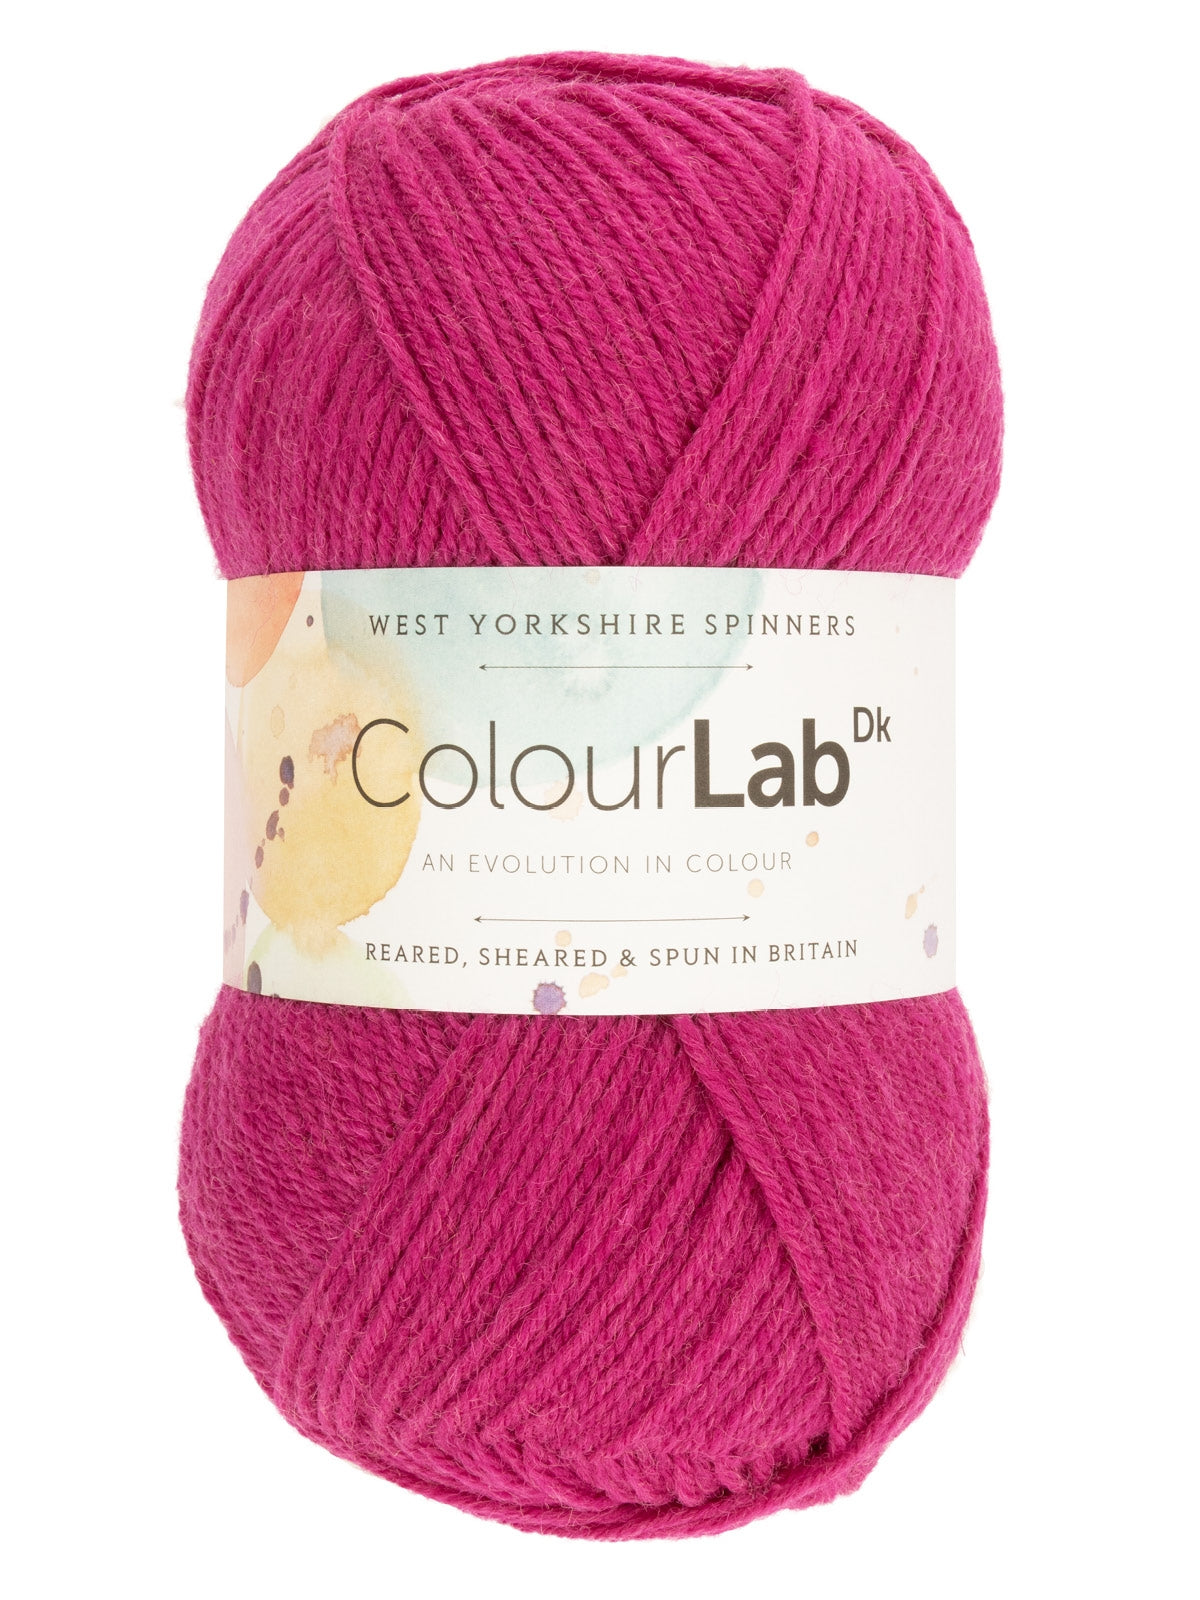 ColourLab DK - West Yorkshire Spinners 100% British Wool